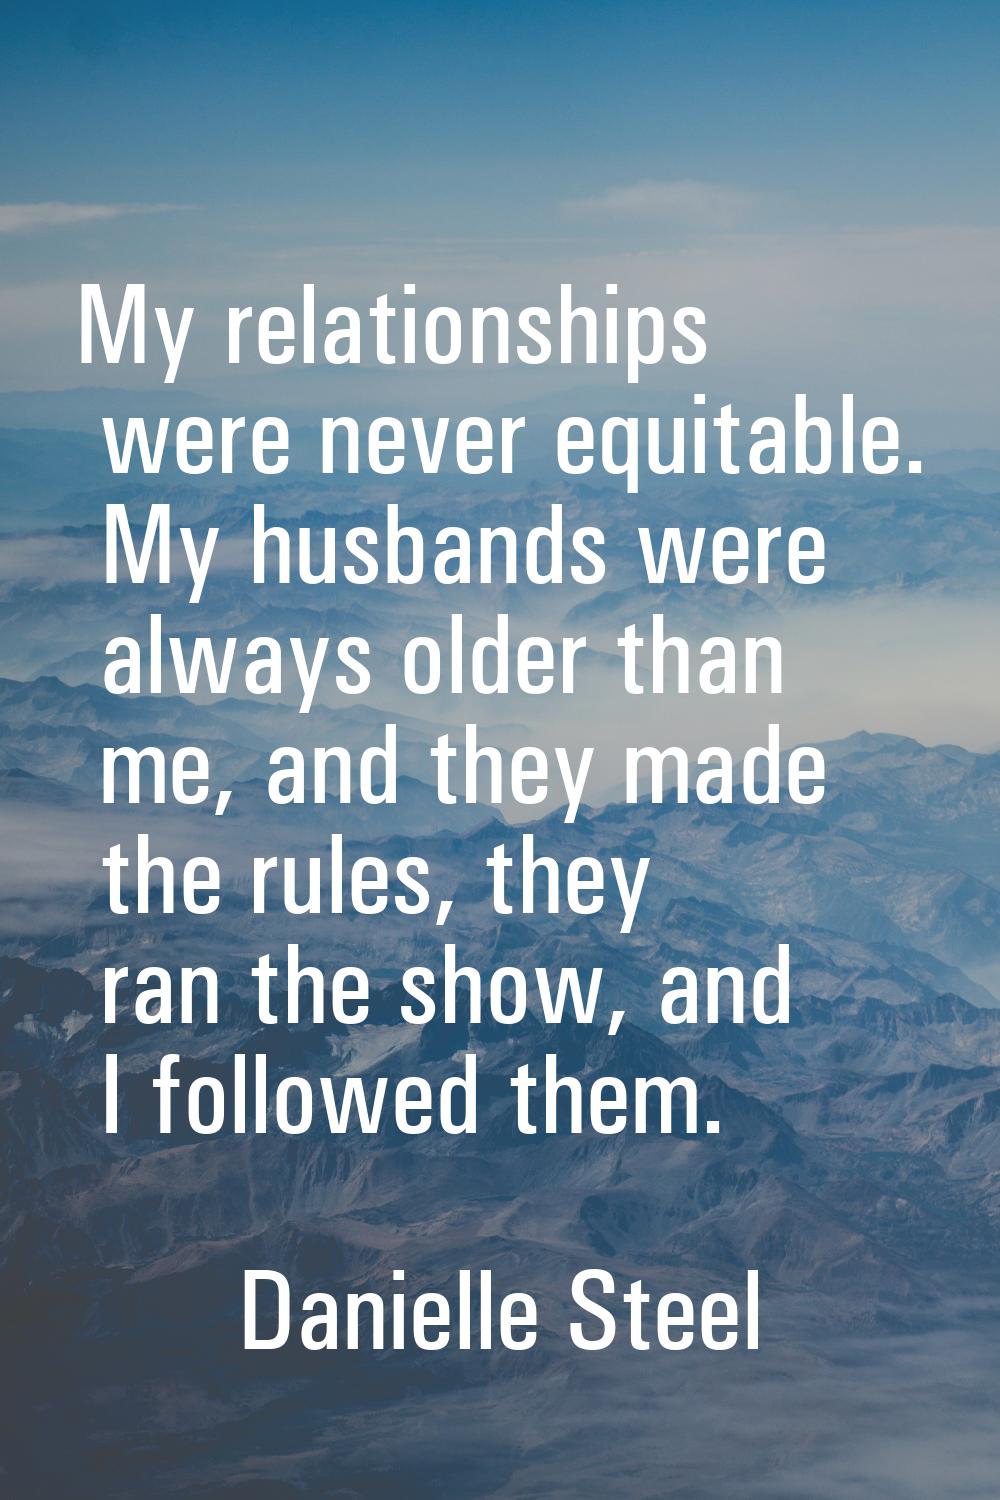 My relationships were never equitable. My husbands were always older than me, and they made the rul